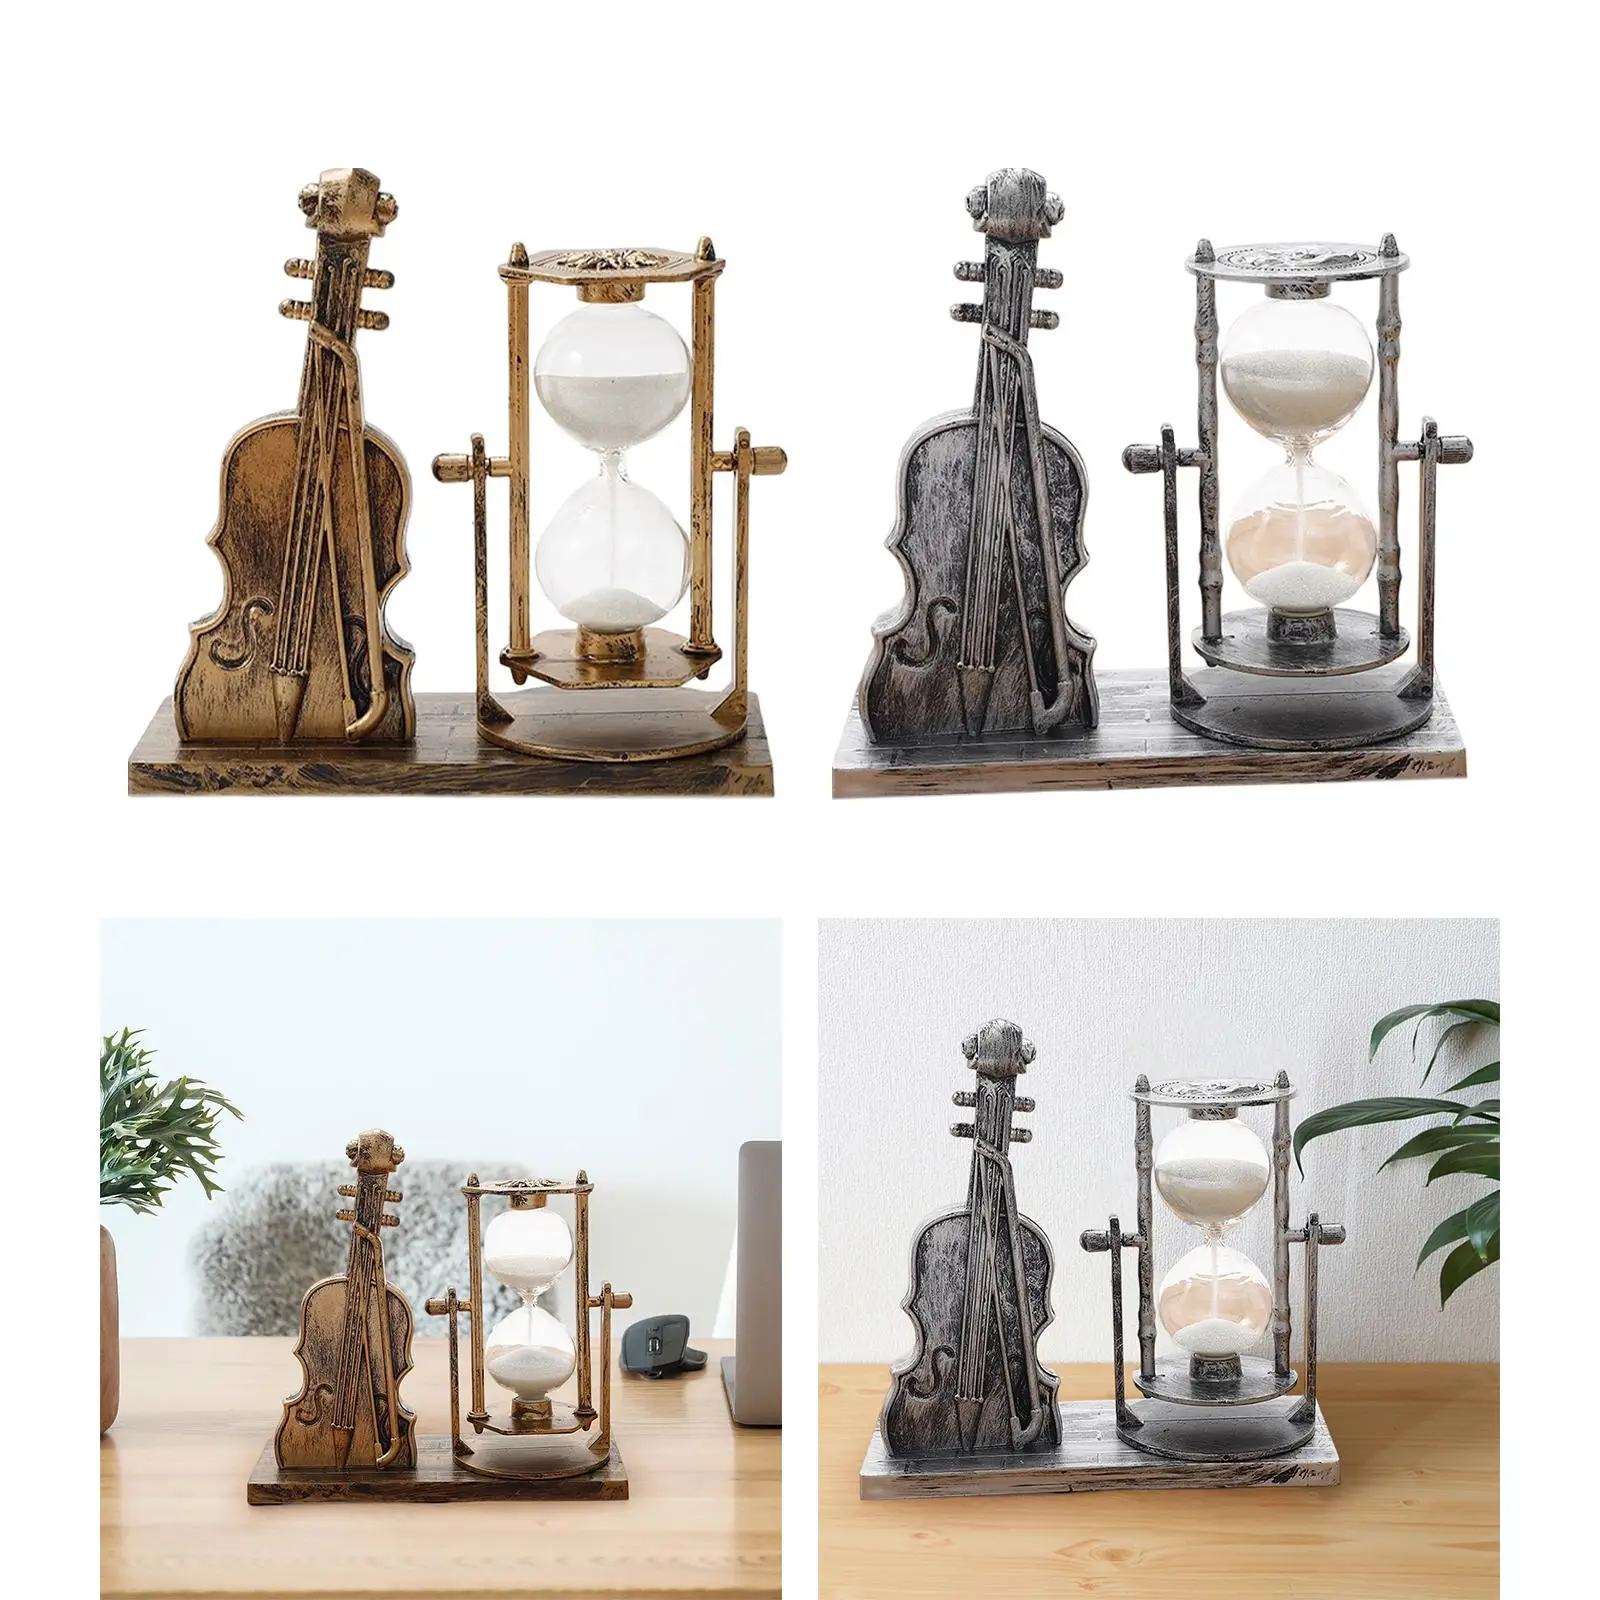 Violin Hourglass Statue Collectible Sandglass Beautiful Decorative Sand Timer for Bedroom Tabletop Holiday Garden Decoration